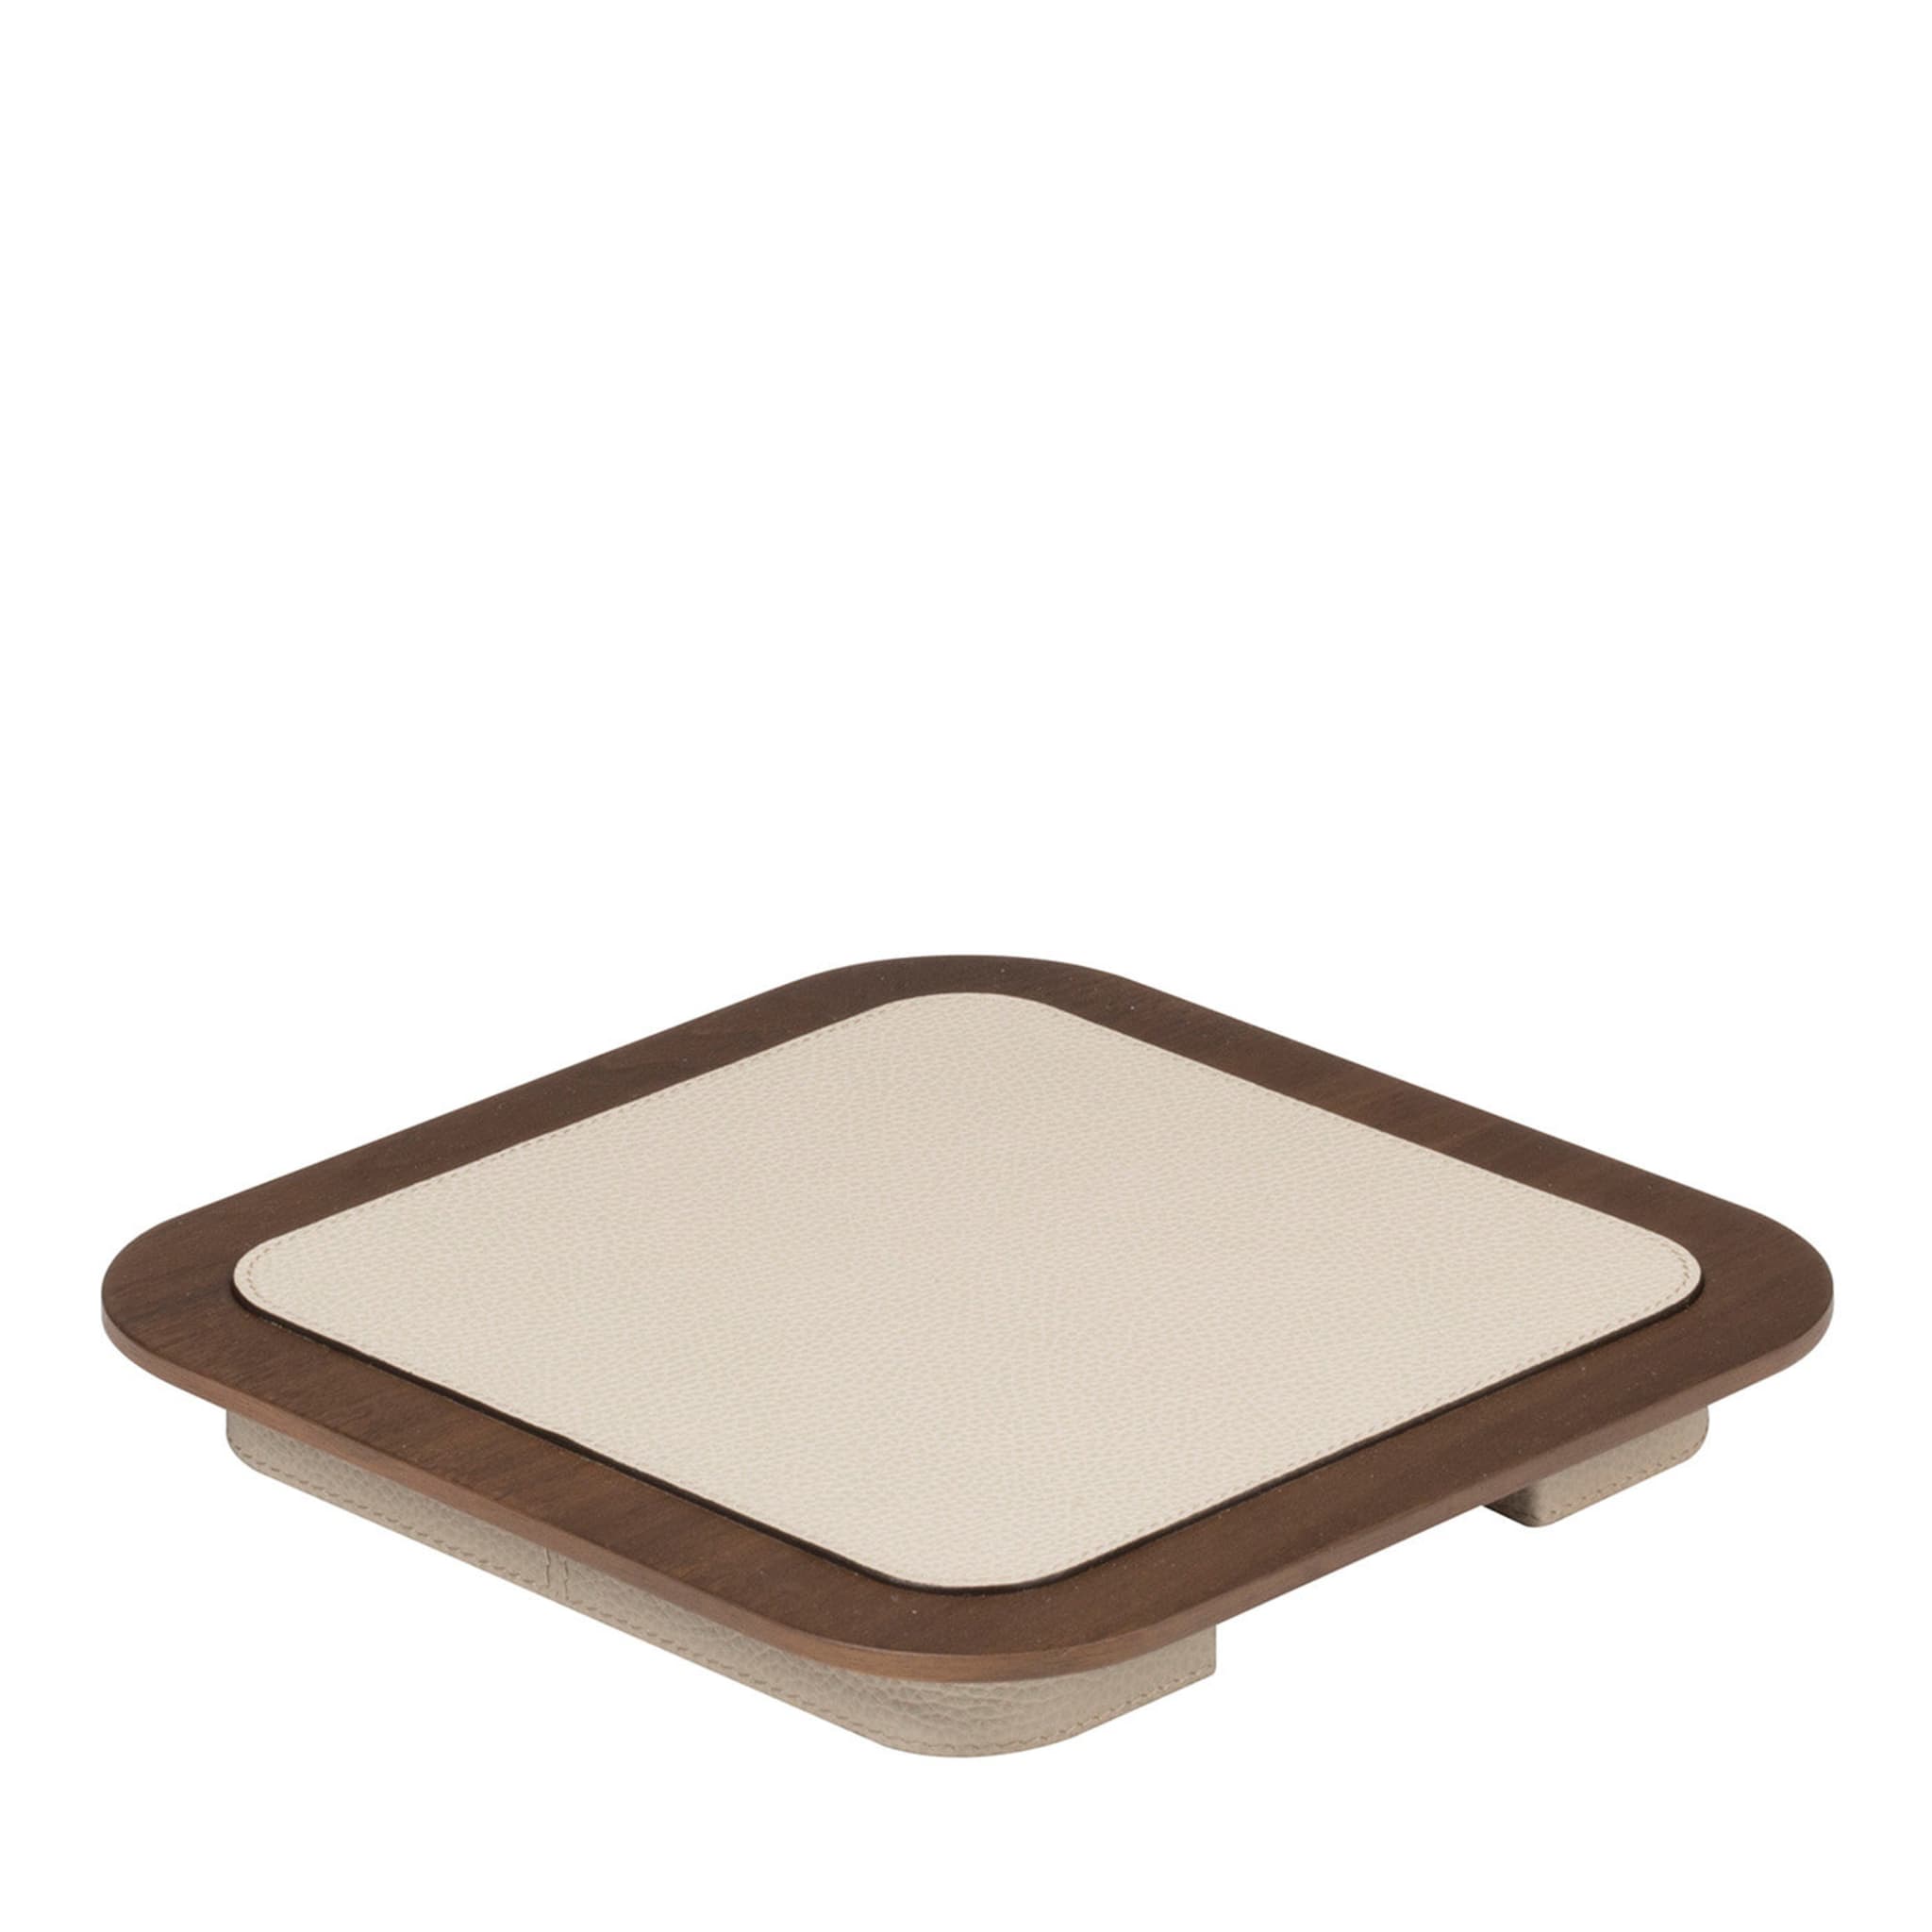 Lloyd Square Tray N. 2 in Beige and Walnut - Main view